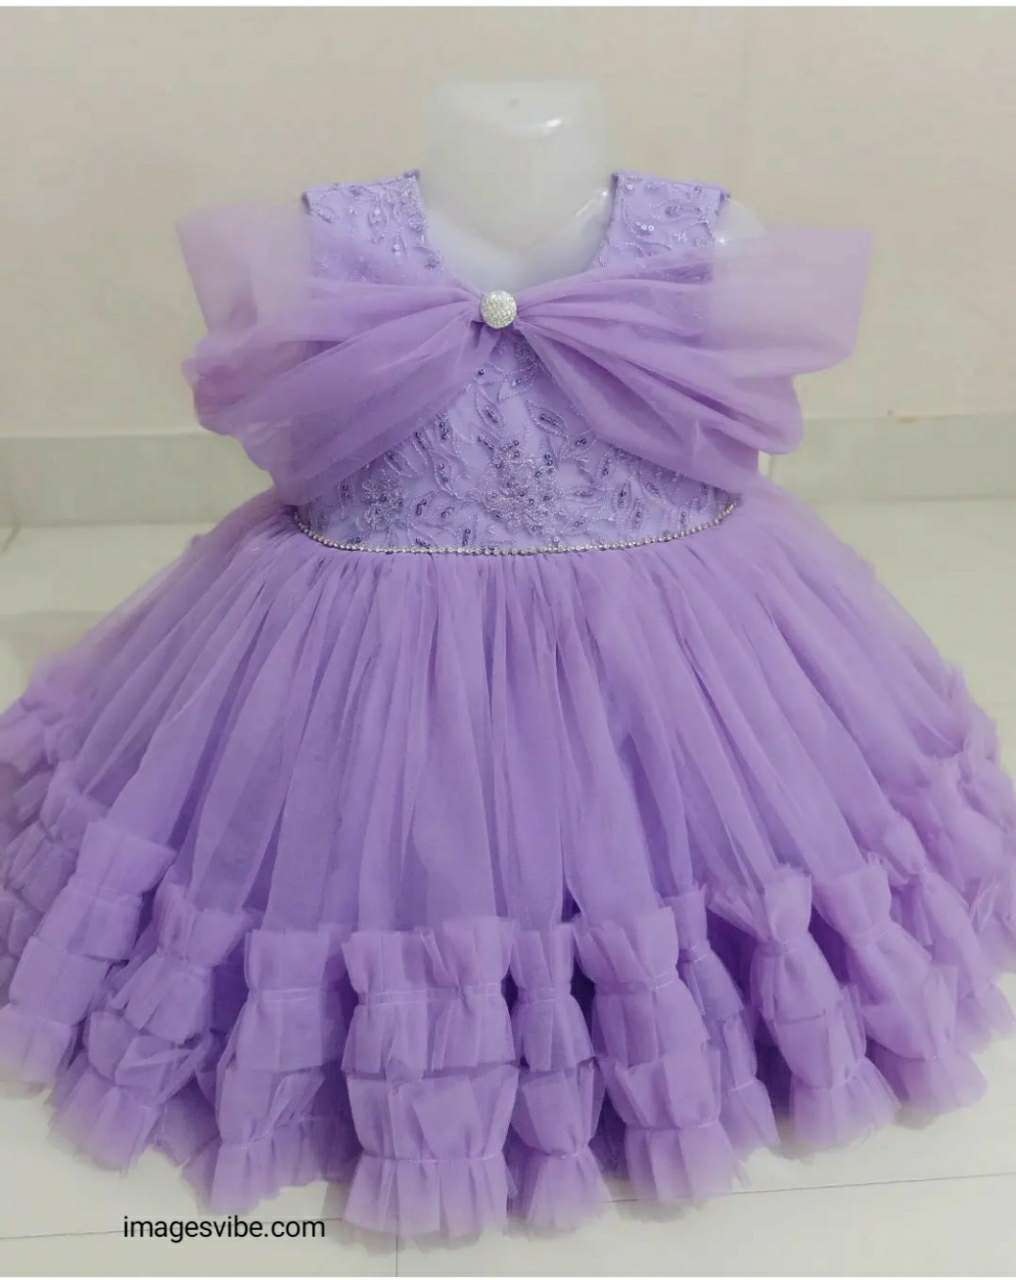 2023 New Style Baby Frocks Designs Latest Baby Frock Designs 2023 frocks   frock design baby  2023 New Style Baby Frocks Designs Latest Baby  Frock Designs 2023 frocks  By Zoyas Collection  Facebook